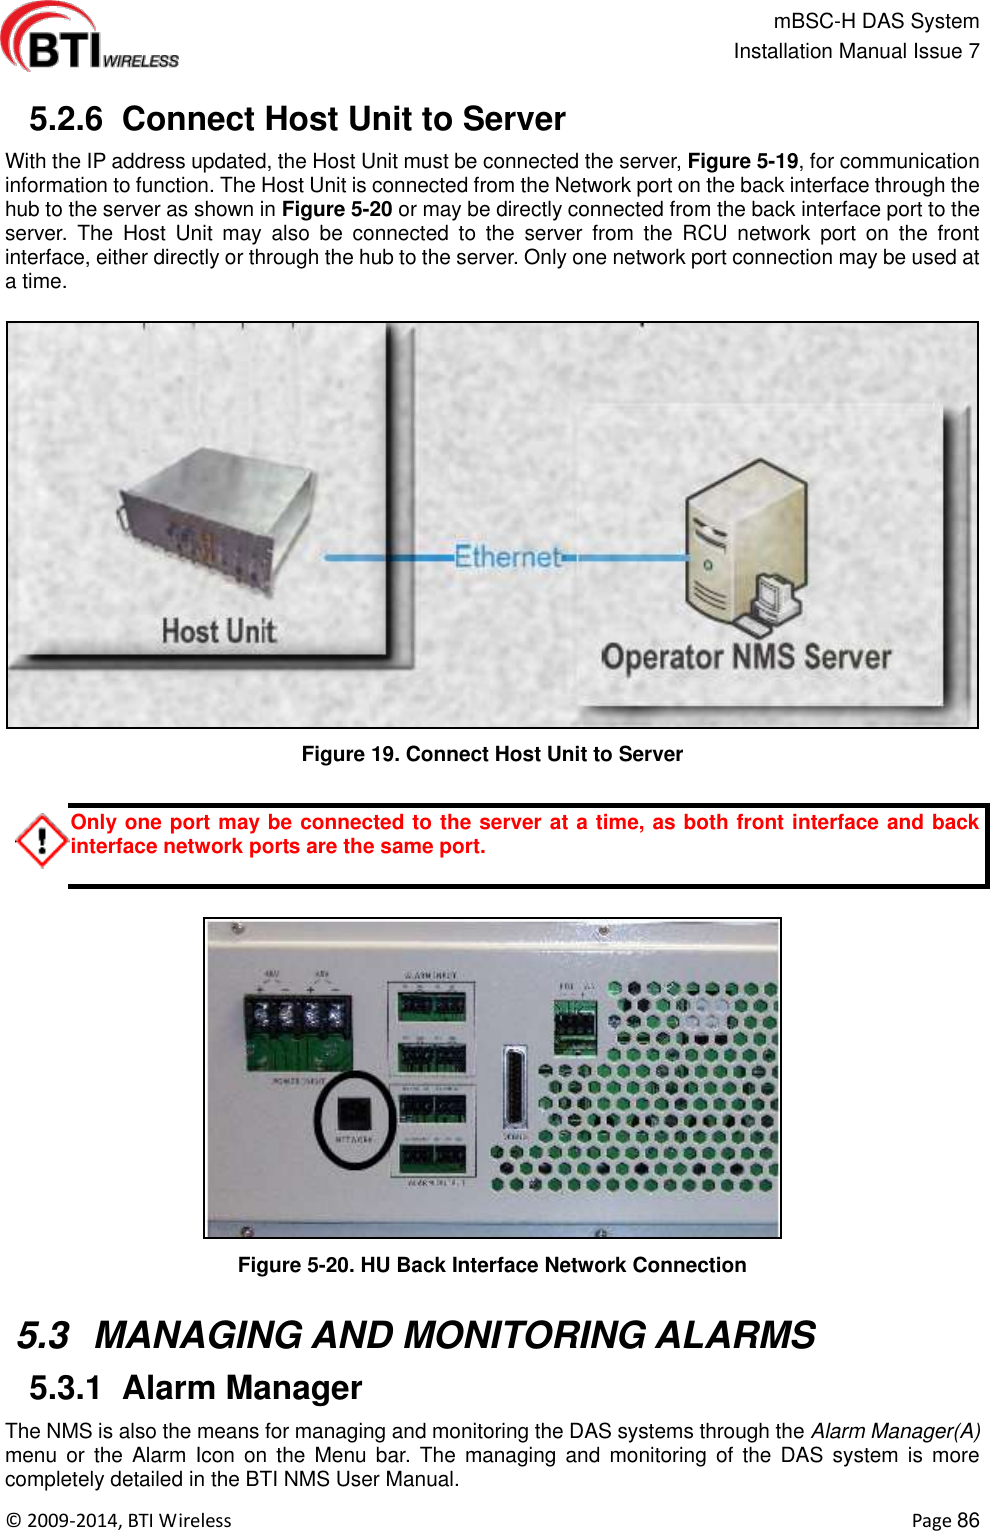                                                   mBSC-H DAS System   Installation Manual Issue 7  ©  2009-2014, BTI Wireless    Page 86   5.2.6  Connect Host Unit to Server With the IP address updated, the Host Unit must be connected the server, Figure 5-19, for communication information to function. The Host Unit is connected from the Network port on the back interface through the hub to the server as shown in Figure 5-20 or may be directly connected from the back interface port to the server.  The  Host  Unit  may  also  be  connected  to  the  server  from  the  RCU  network  port  on  the  front interface, either directly or through the hub to the server. Only one network port connection may be used at a time.  Figure 19. Connect Host Unit to Server  Only one port may be connected to the server at a time, as both front interface and back interface network ports are the same port.   Figure 5-20. HU Back Interface Network Connection   5.3  MANAGING AND MONITORING ALARMS  5.3.1  Alarm Manager The NMS is also the means for managing and monitoring the DAS systems through the Alarm Manager(A) menu  or  the  Alarm  Icon  on  the  Menu  bar. The  managing  and  monitoring  of  the  DAS  system  is more completely detailed in the BTI NMS User Manual. 